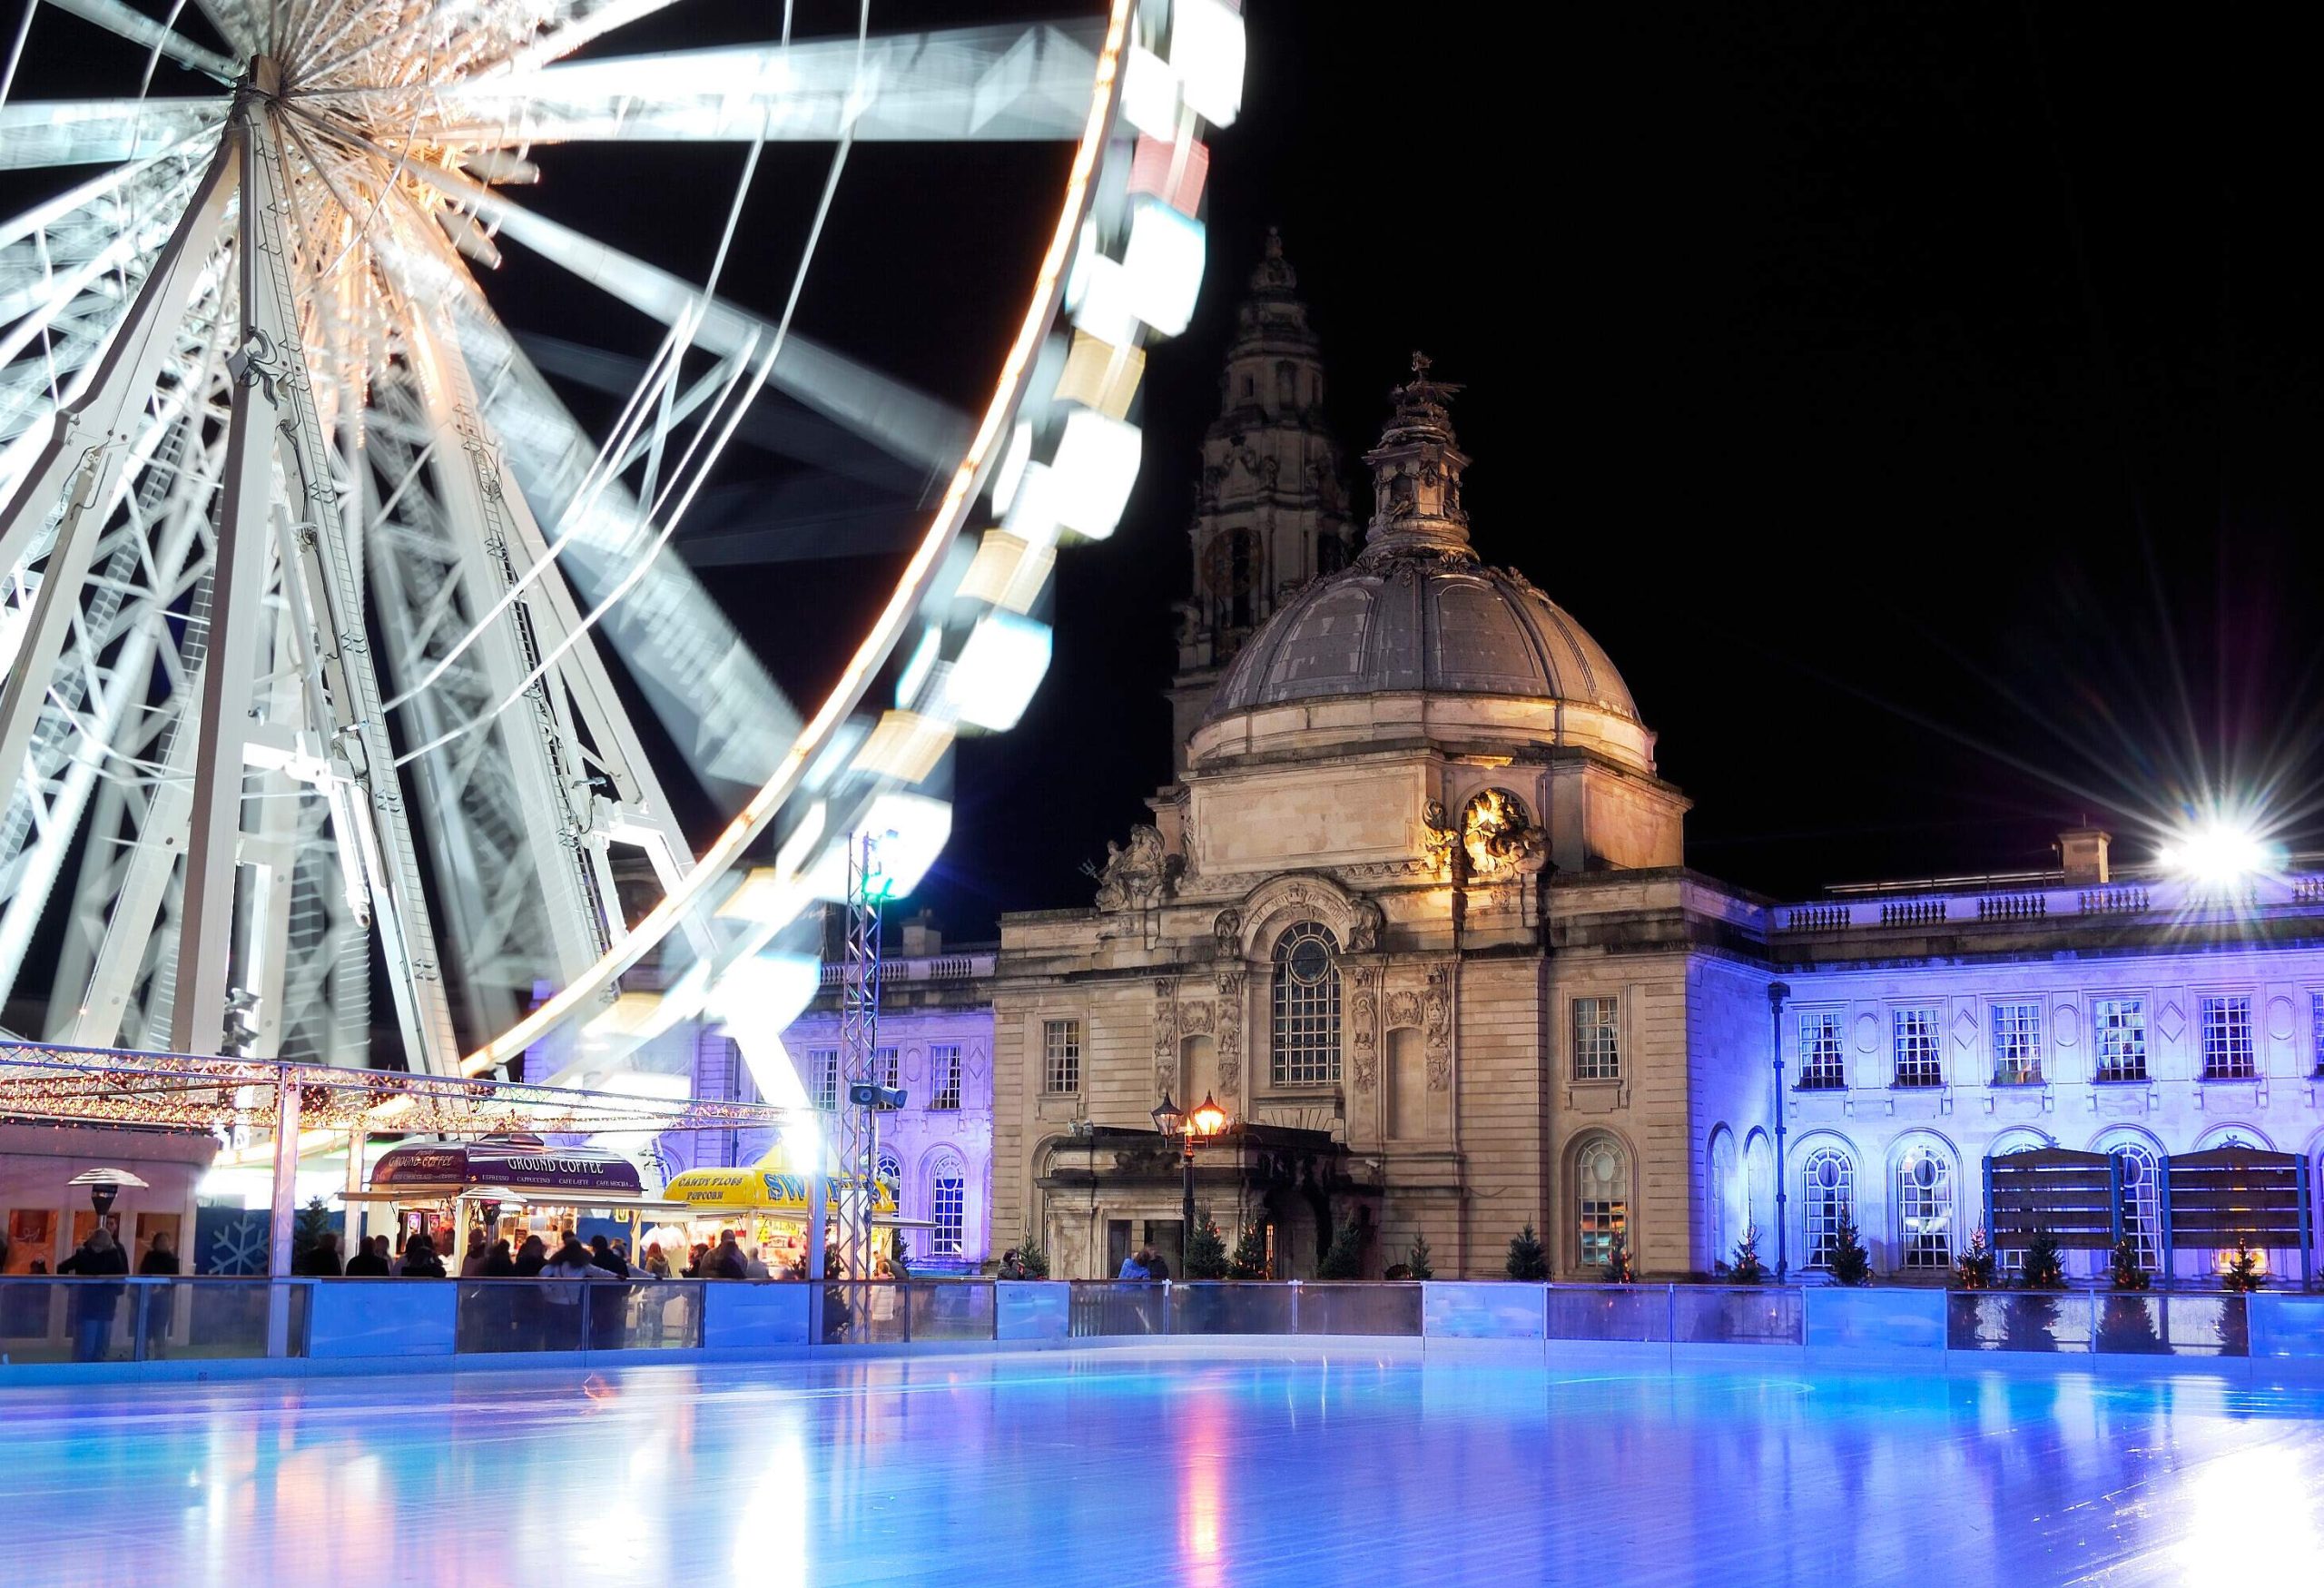 An empty Ice rink and winterwonderland Cardiff. City Hall in background.